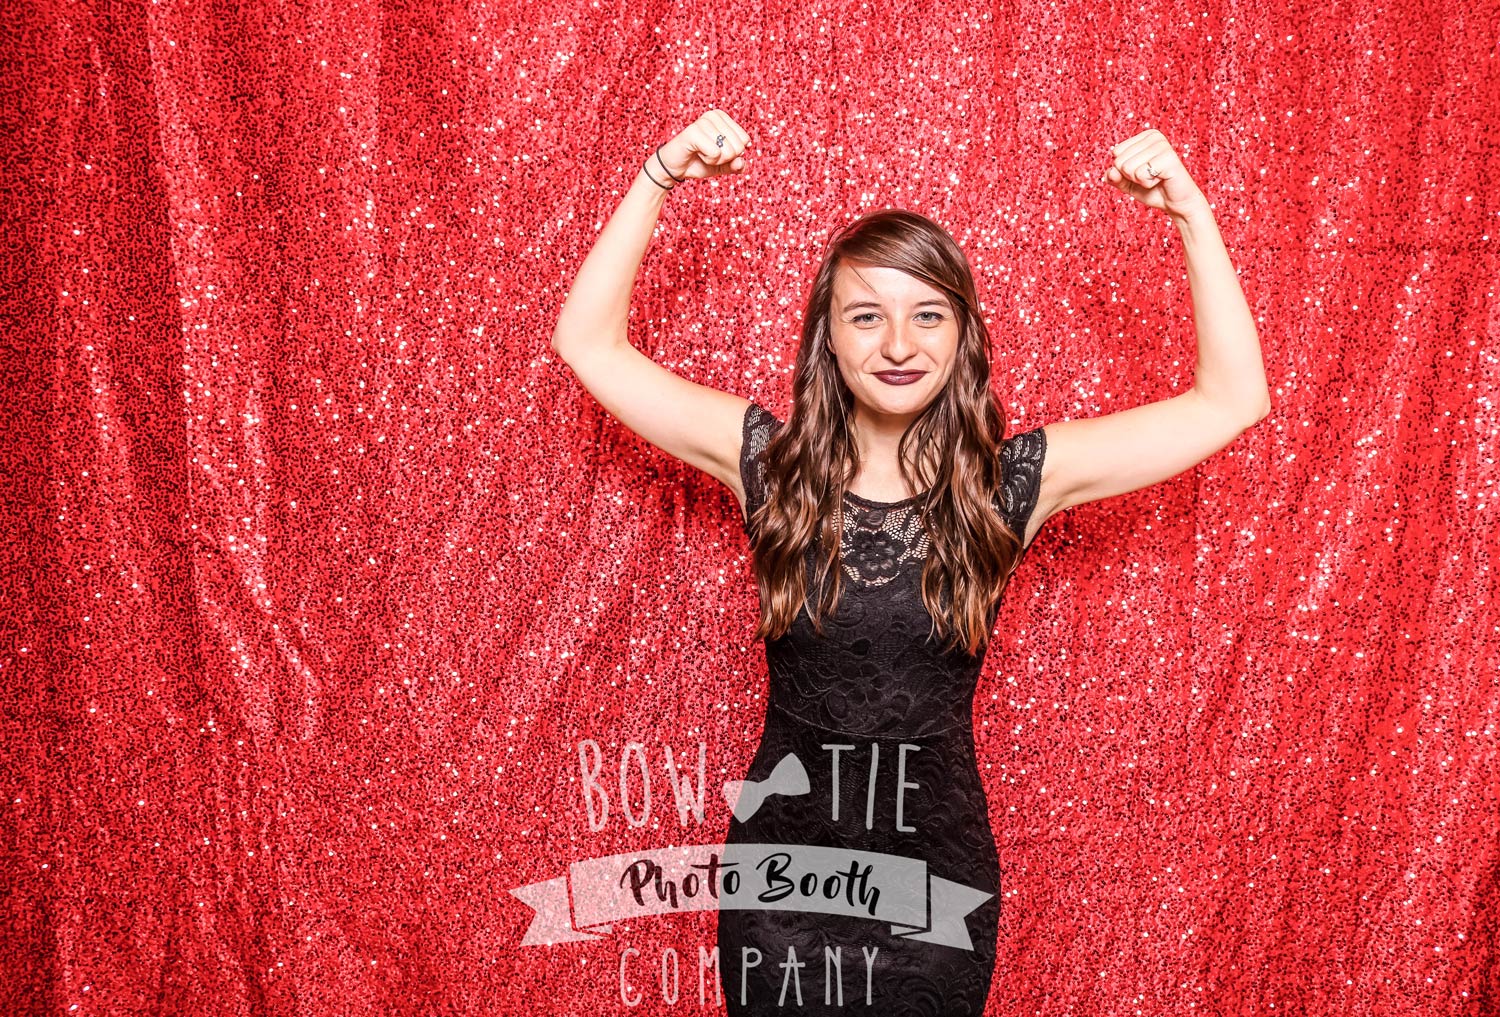 Buffalo Photo booth Backdrop with red sequins